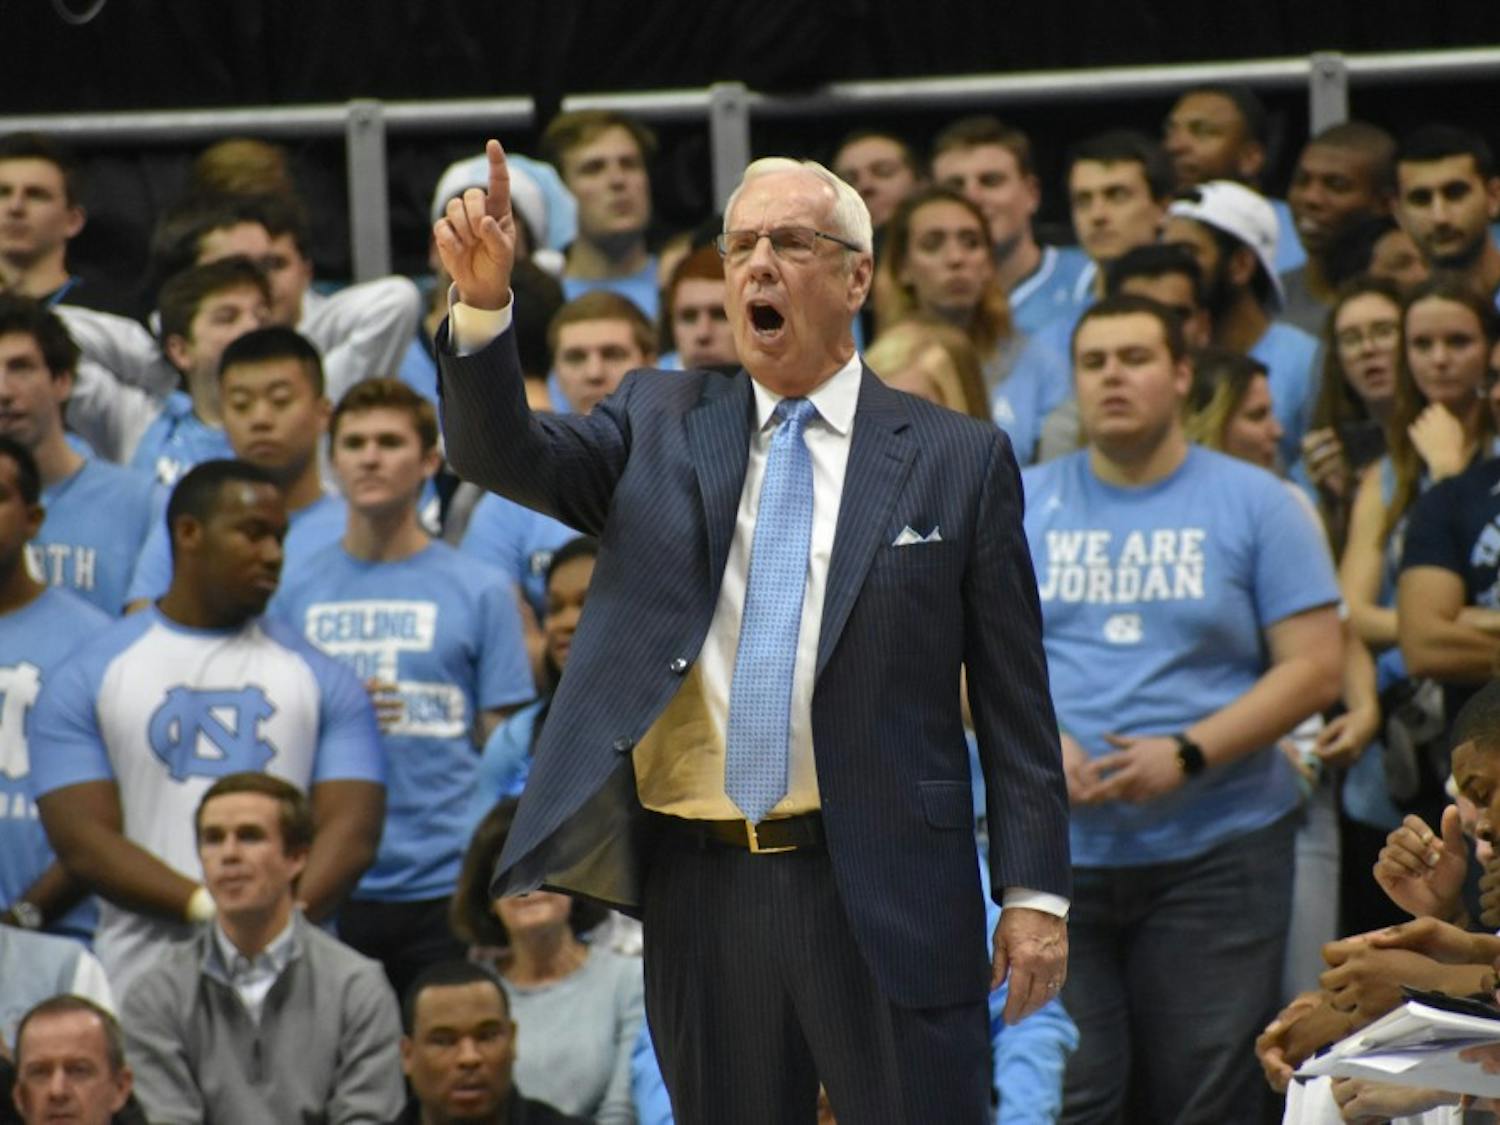 Men's basketball head coach Roy Williams yells from the sideline against Michigan on Nov. 29 in the Smith Center.